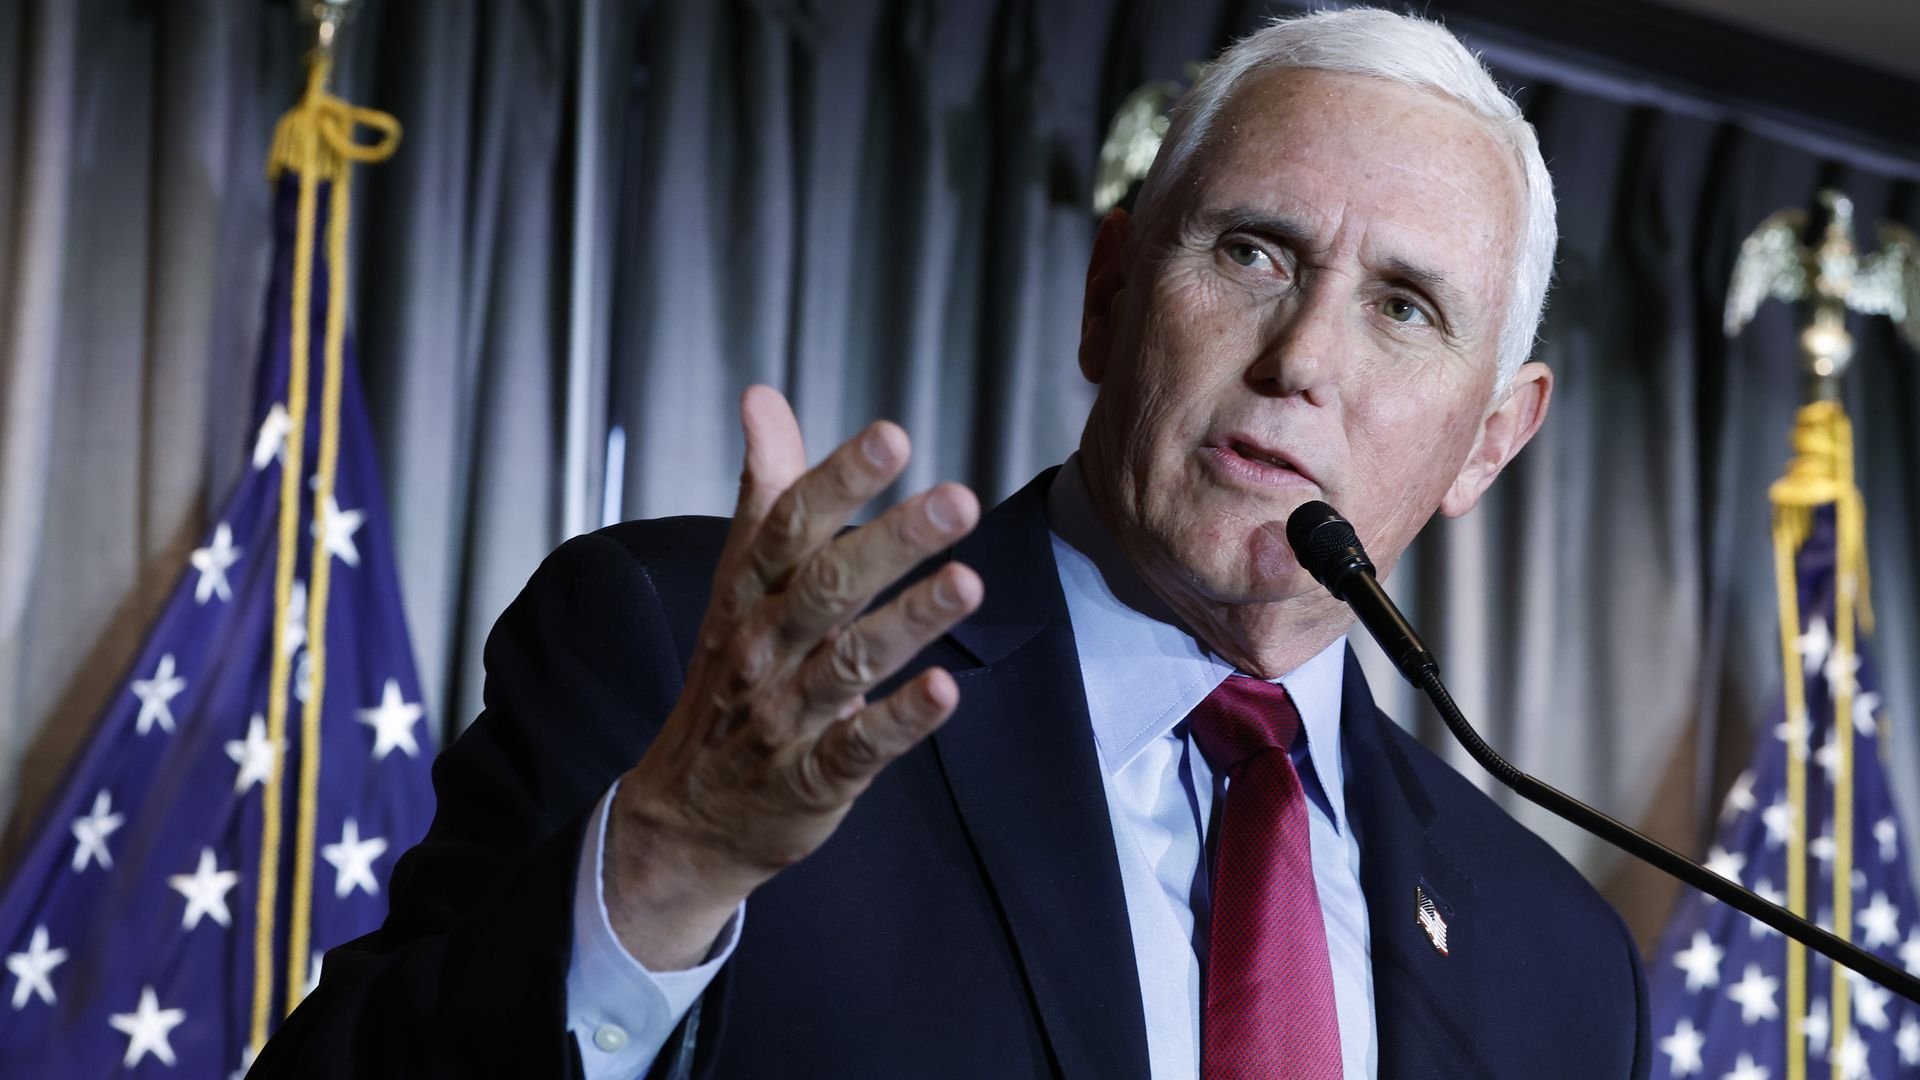 Pence calls Trump's indictment an "outrage"